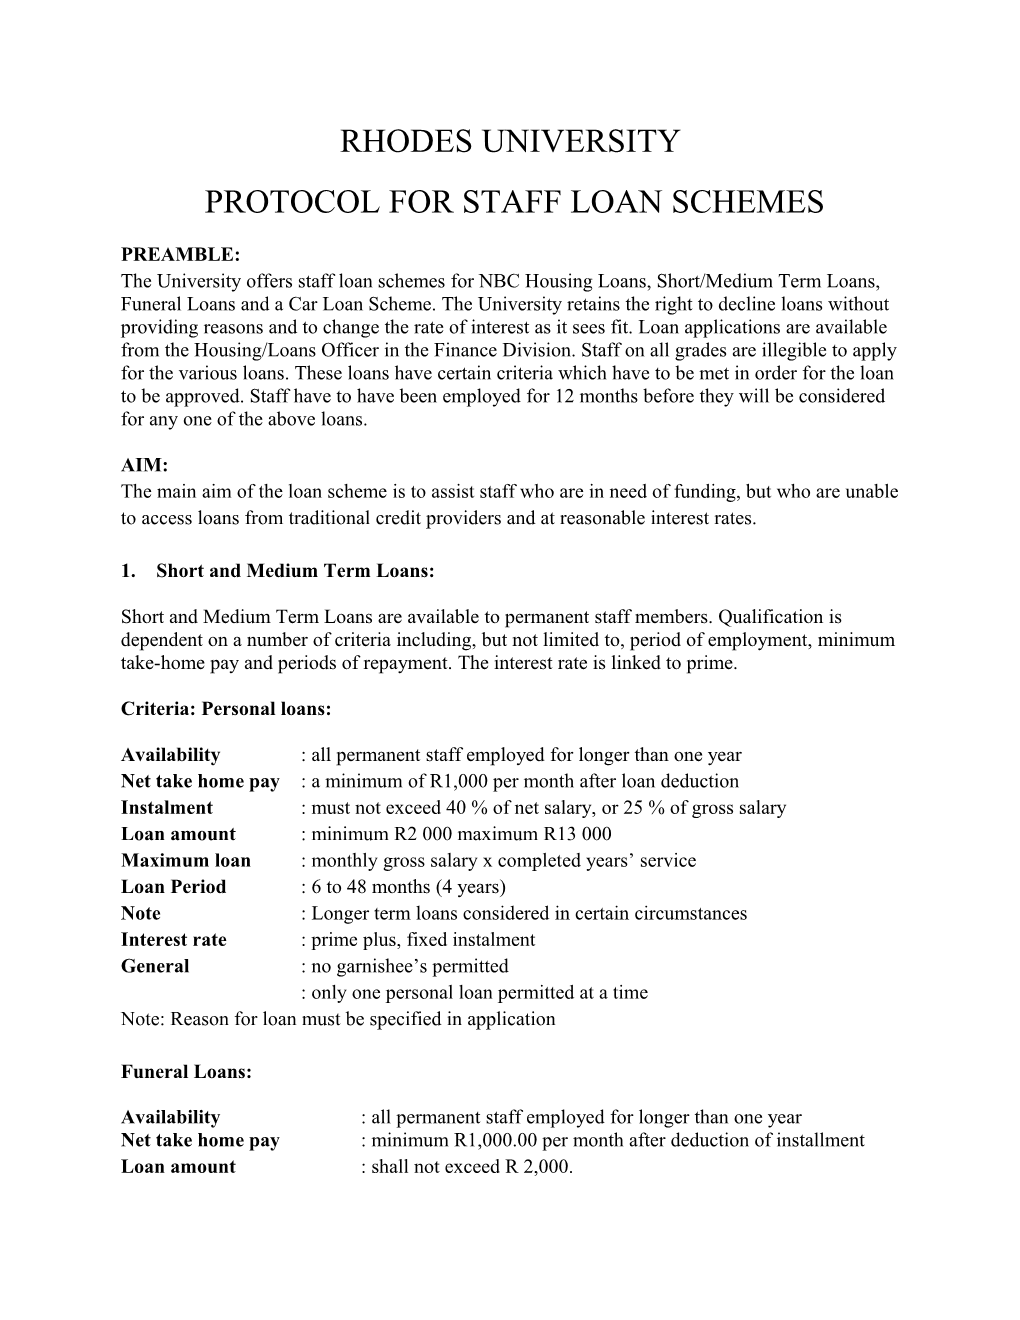 Protocol for Staff Loan Schemes